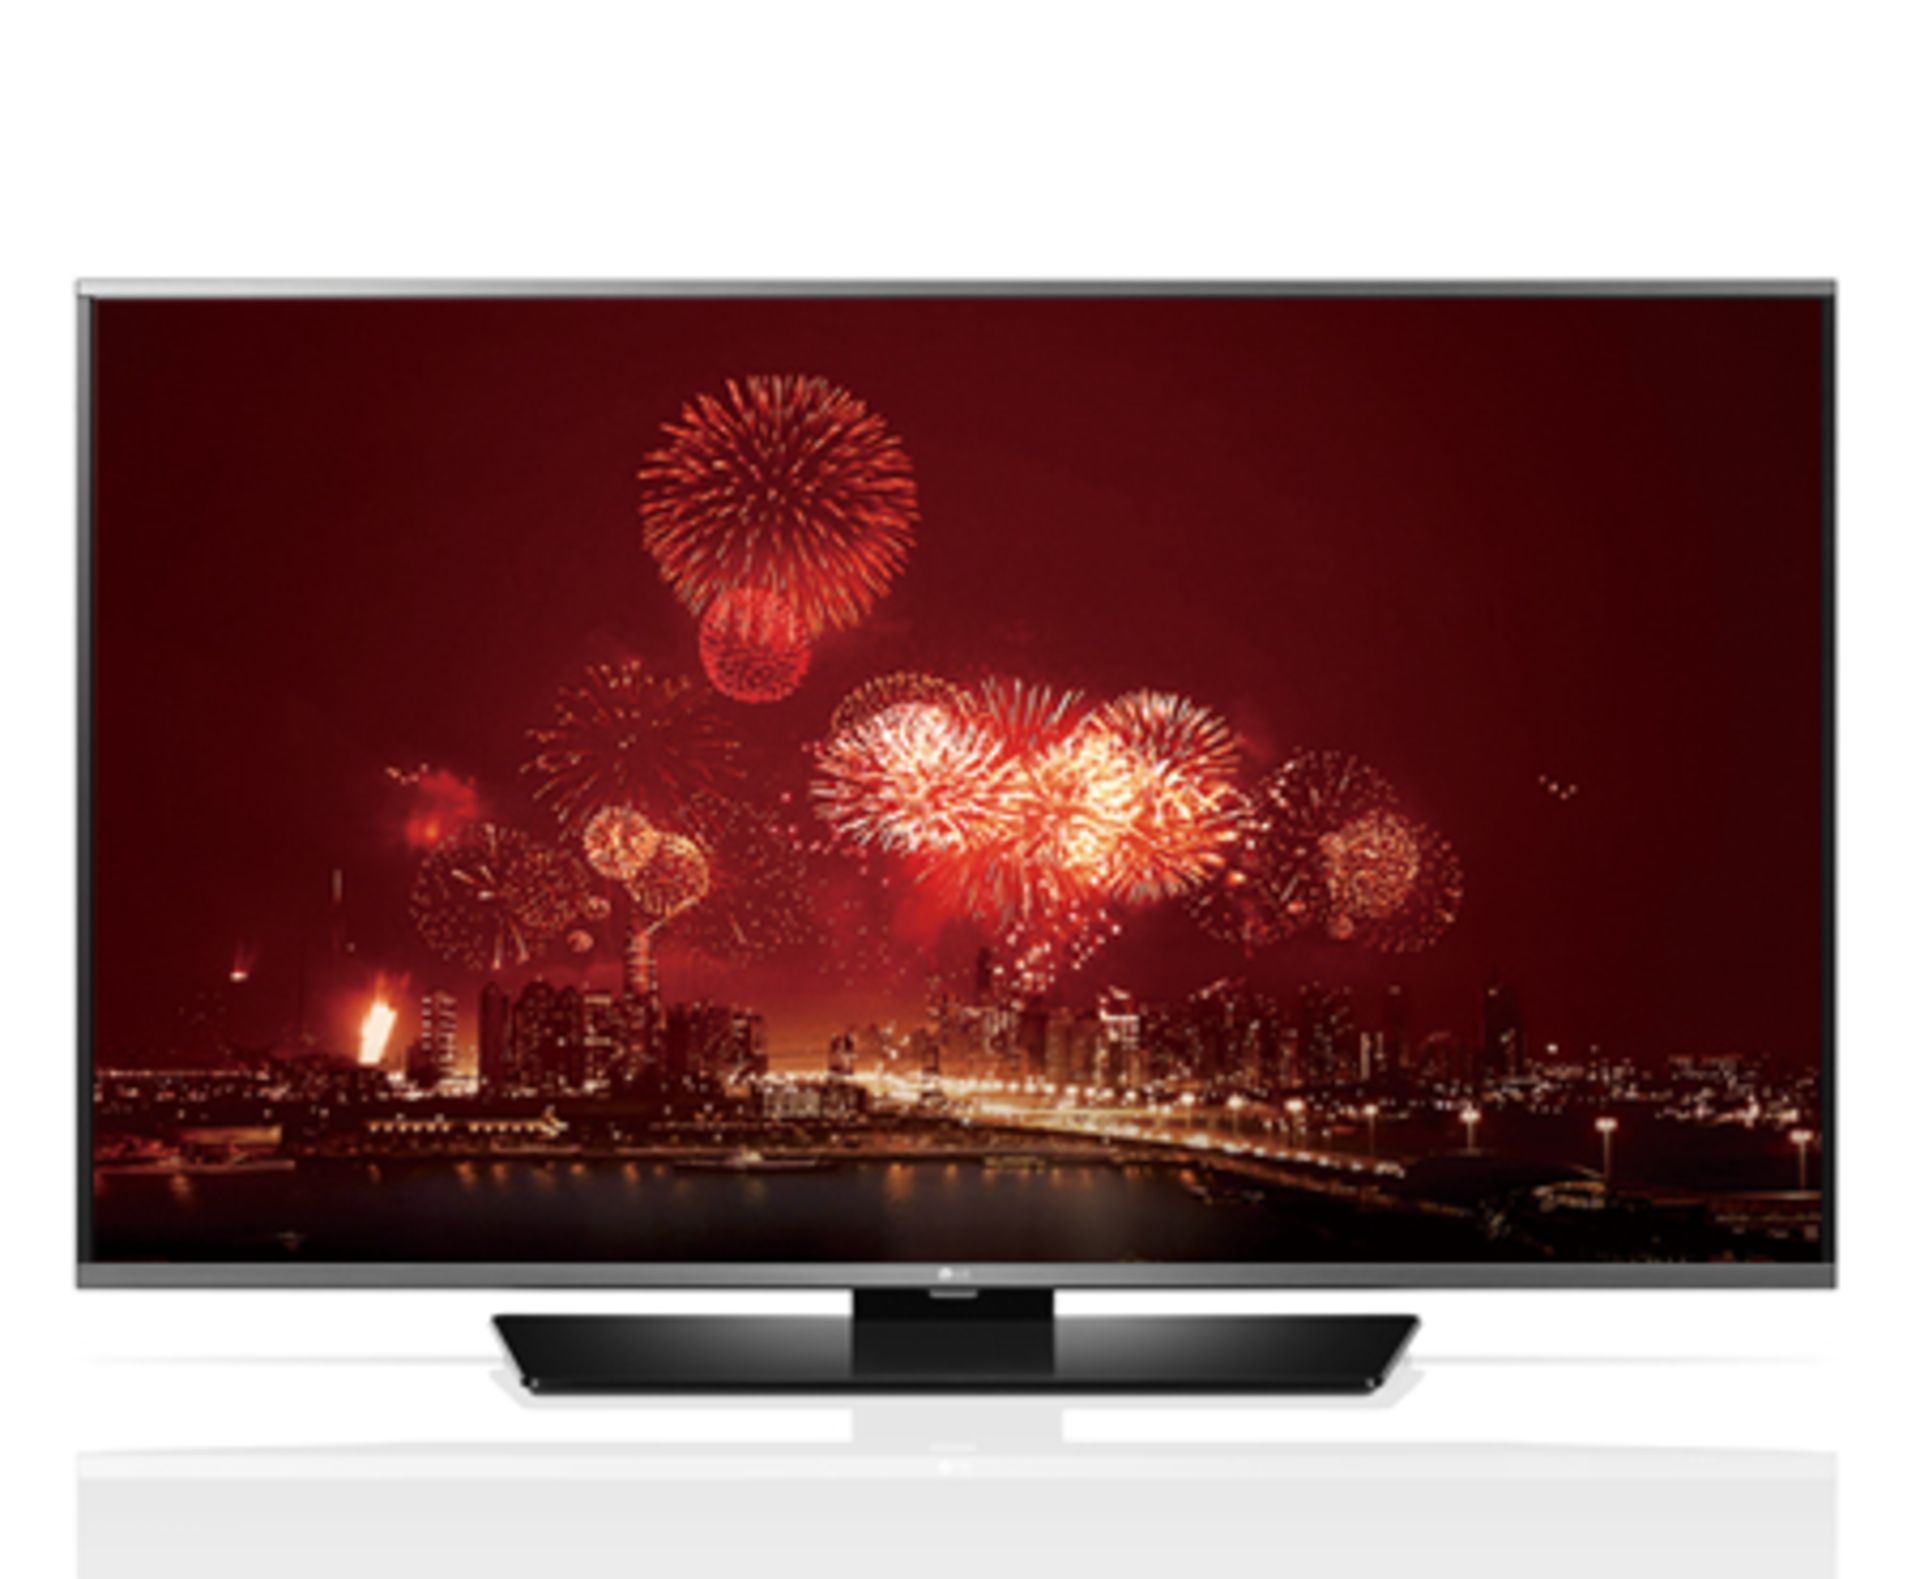 V Grade A 55" FULL HD LED SMART TV WITH FREEVIEW HD & WIFI & WEBOS 2.0 55LF630V (Item Will Be